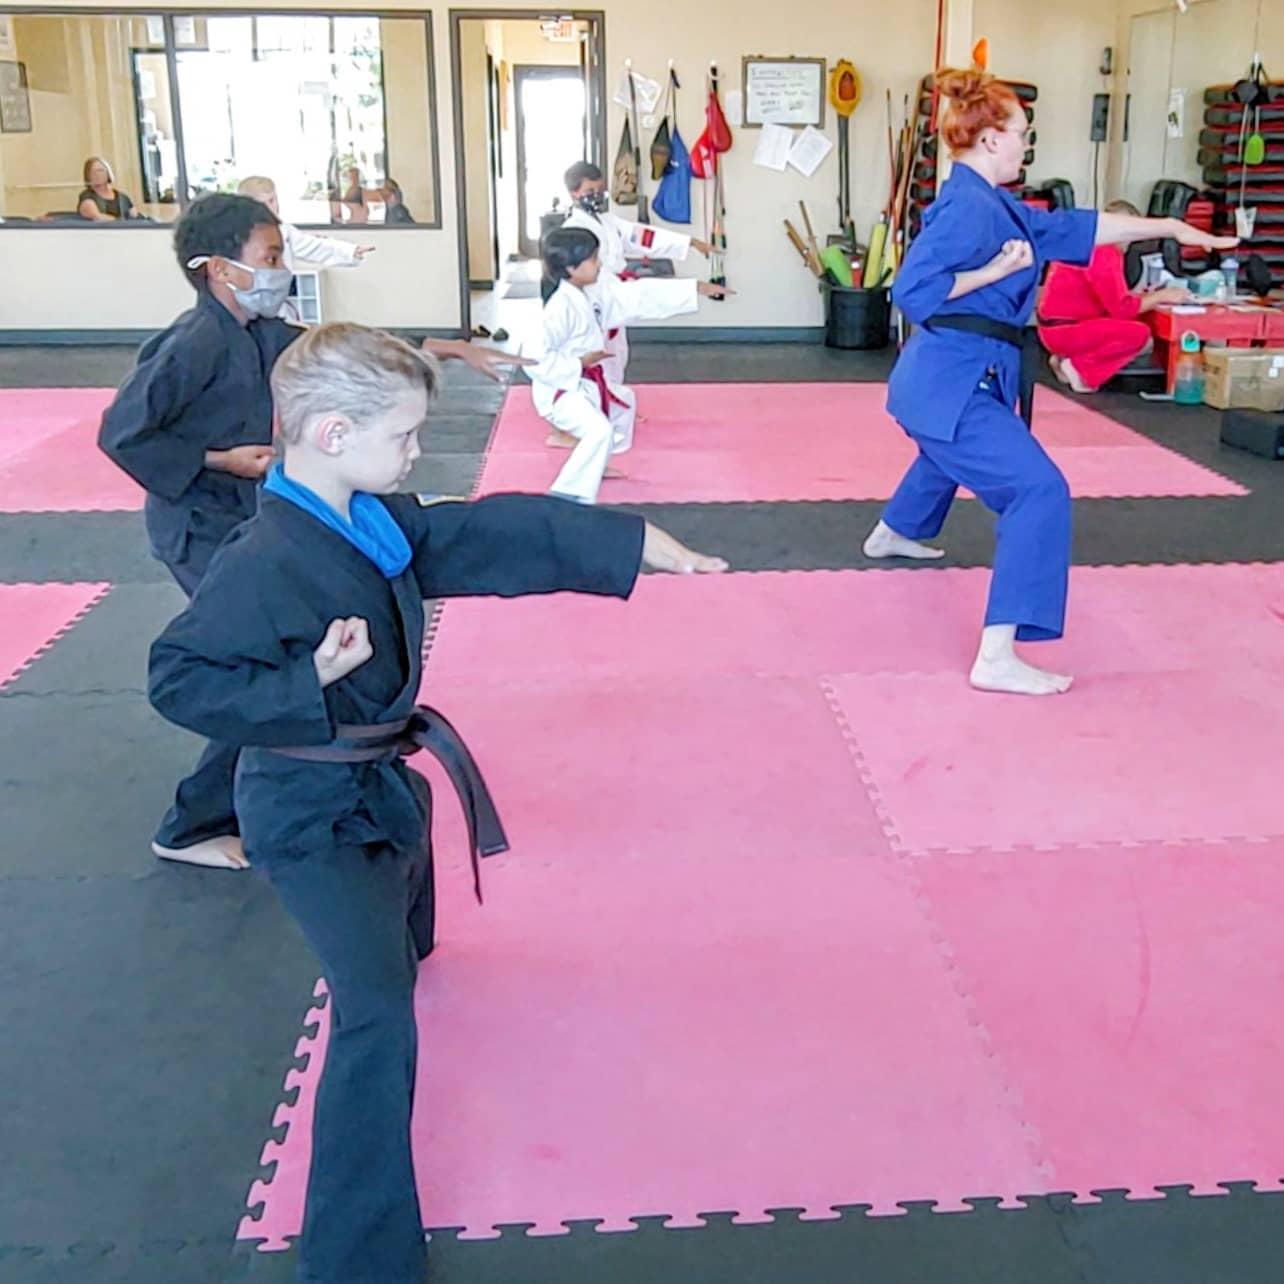 We have developed a unique program, teaching those skills that can be used to improve your health, confidence, and concentration as well as self-defense.